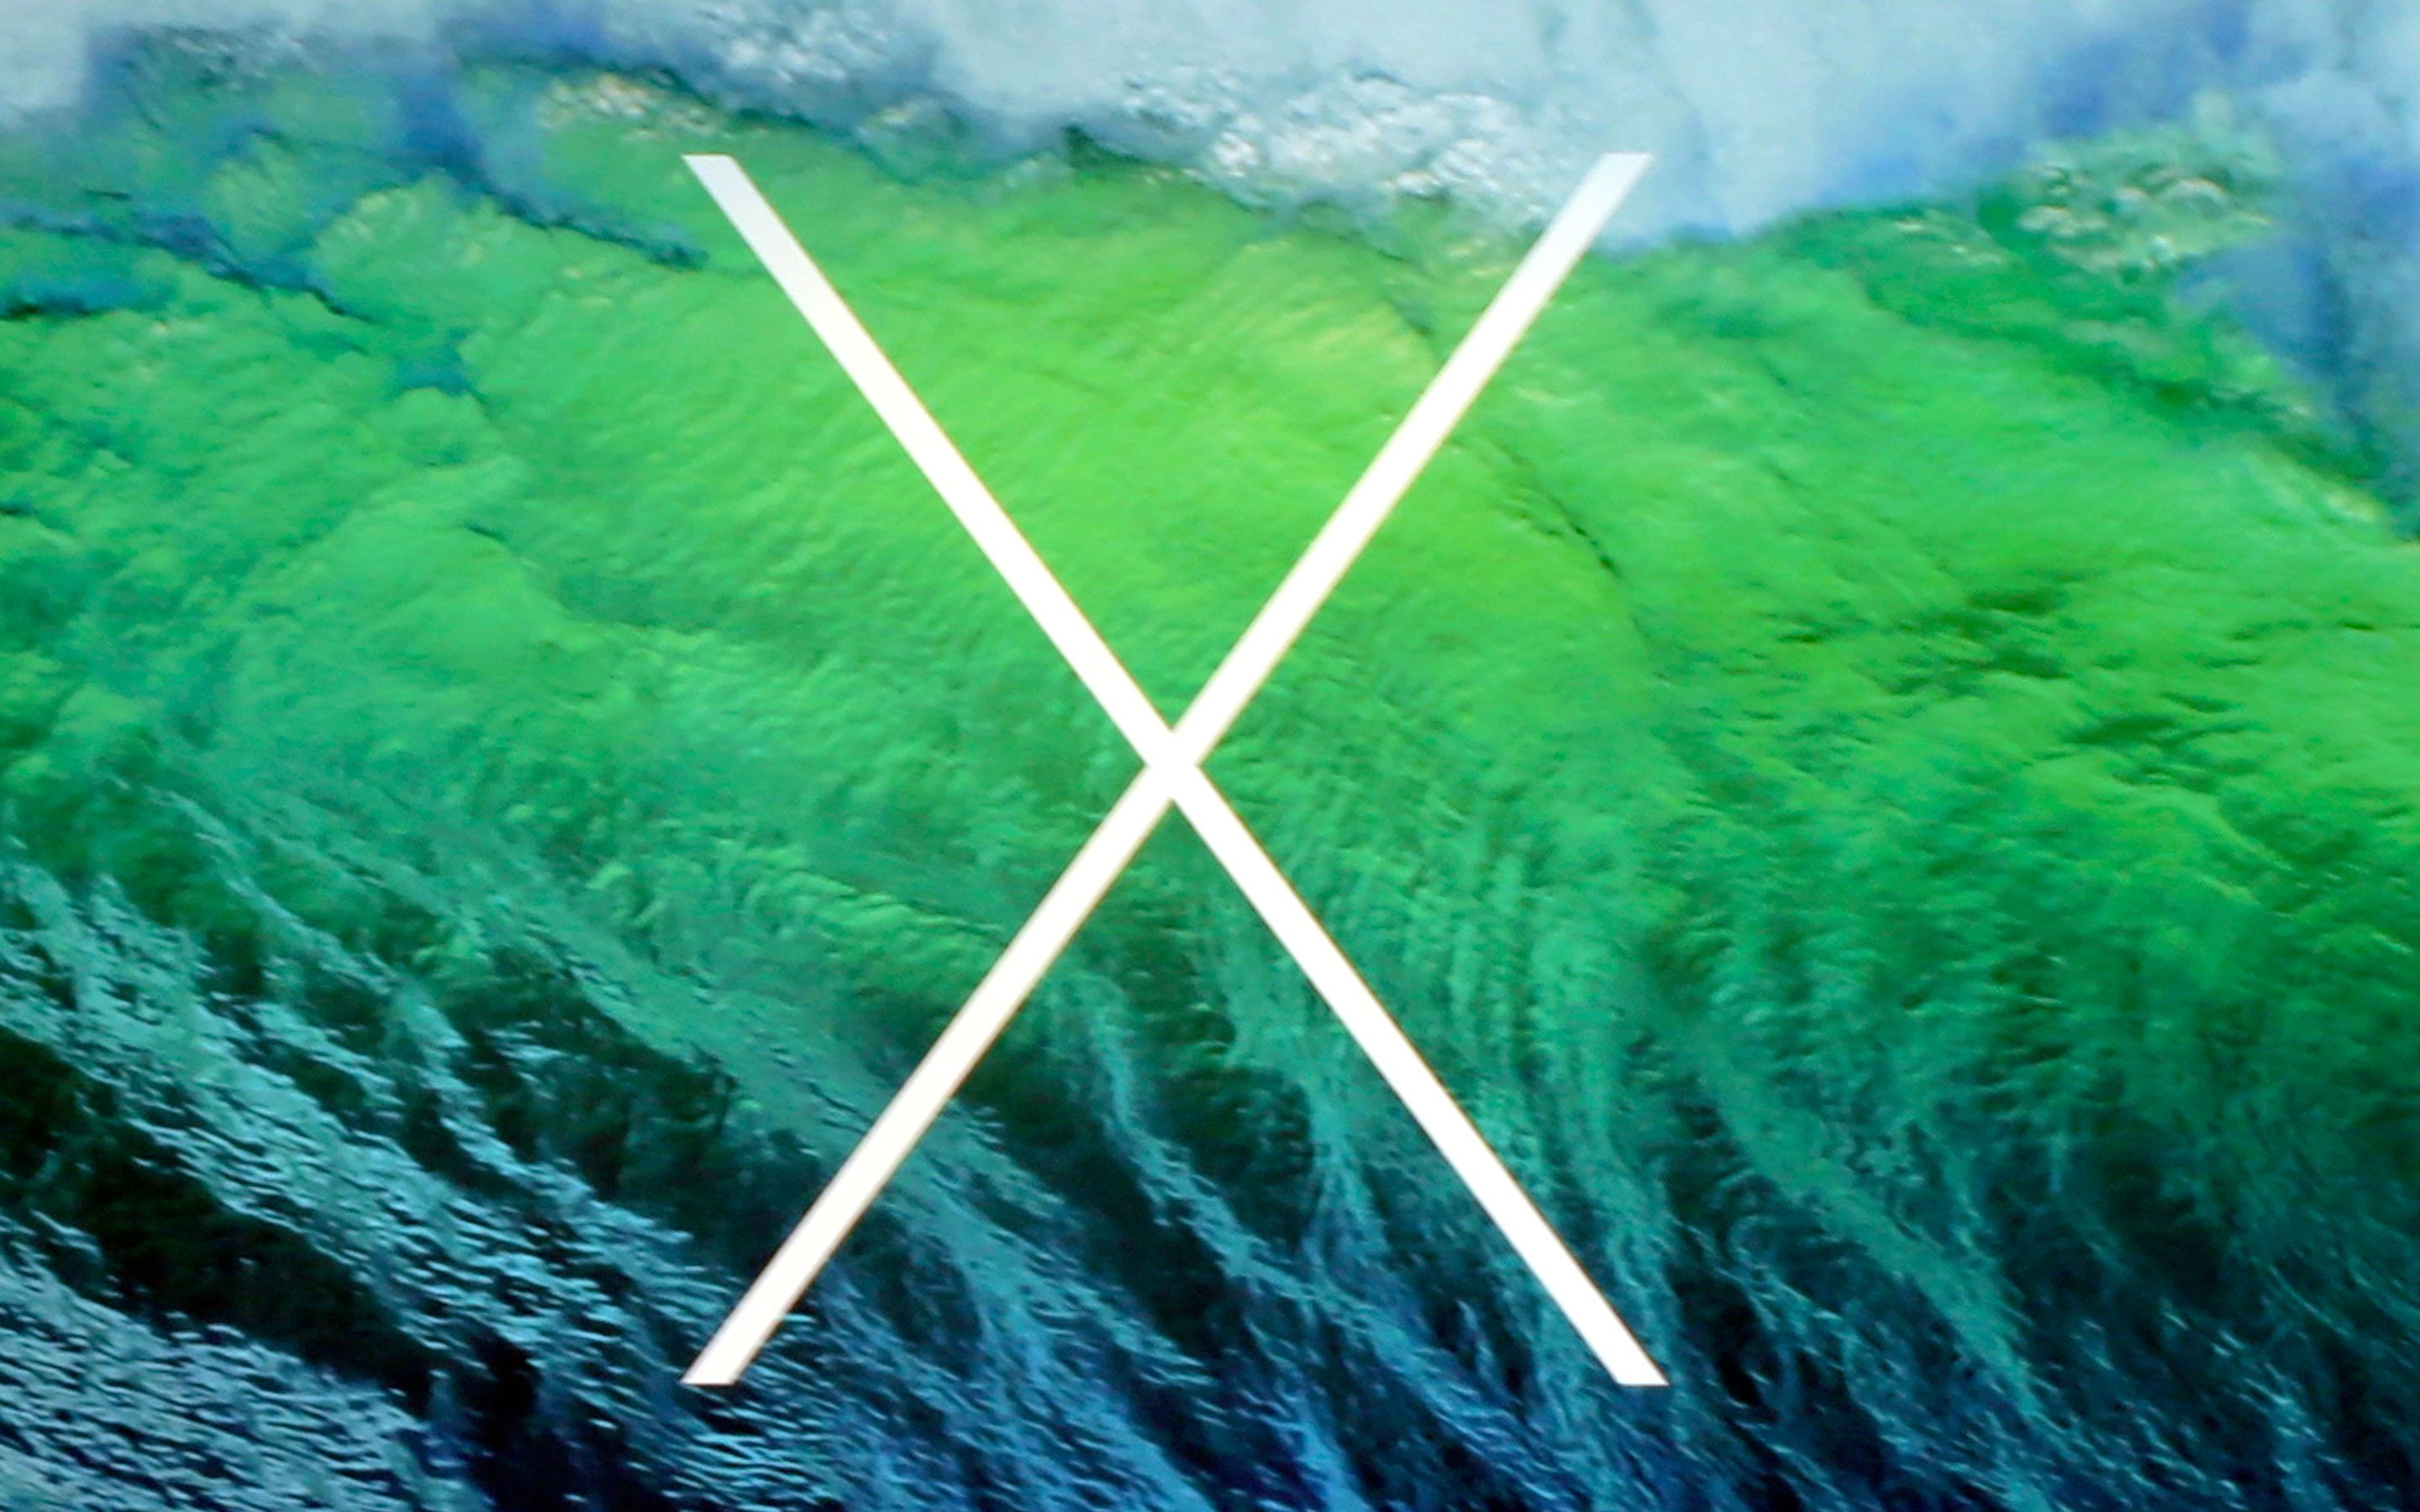 iOS 7 dots, OS X 10.9 wave, and more WWDC 2013 banners -- plus ...